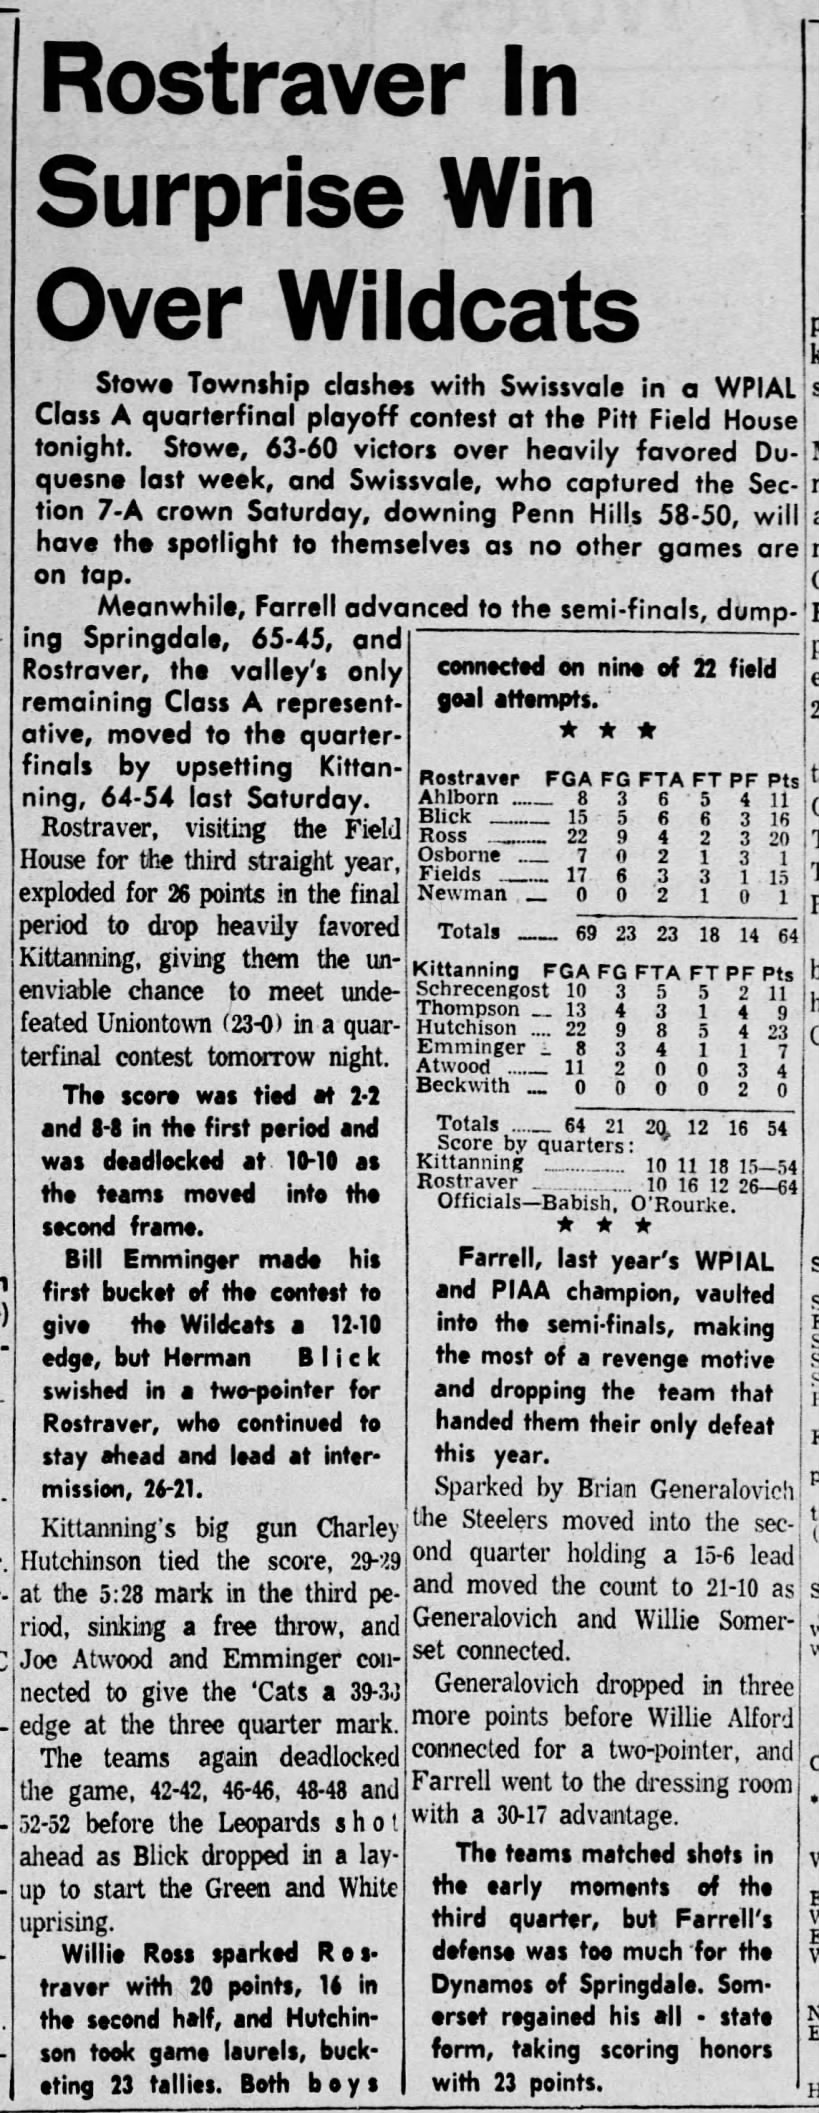 7Mar1960 Rostraver Moves to Quarter Finals by Dumping Kittaning 66-54